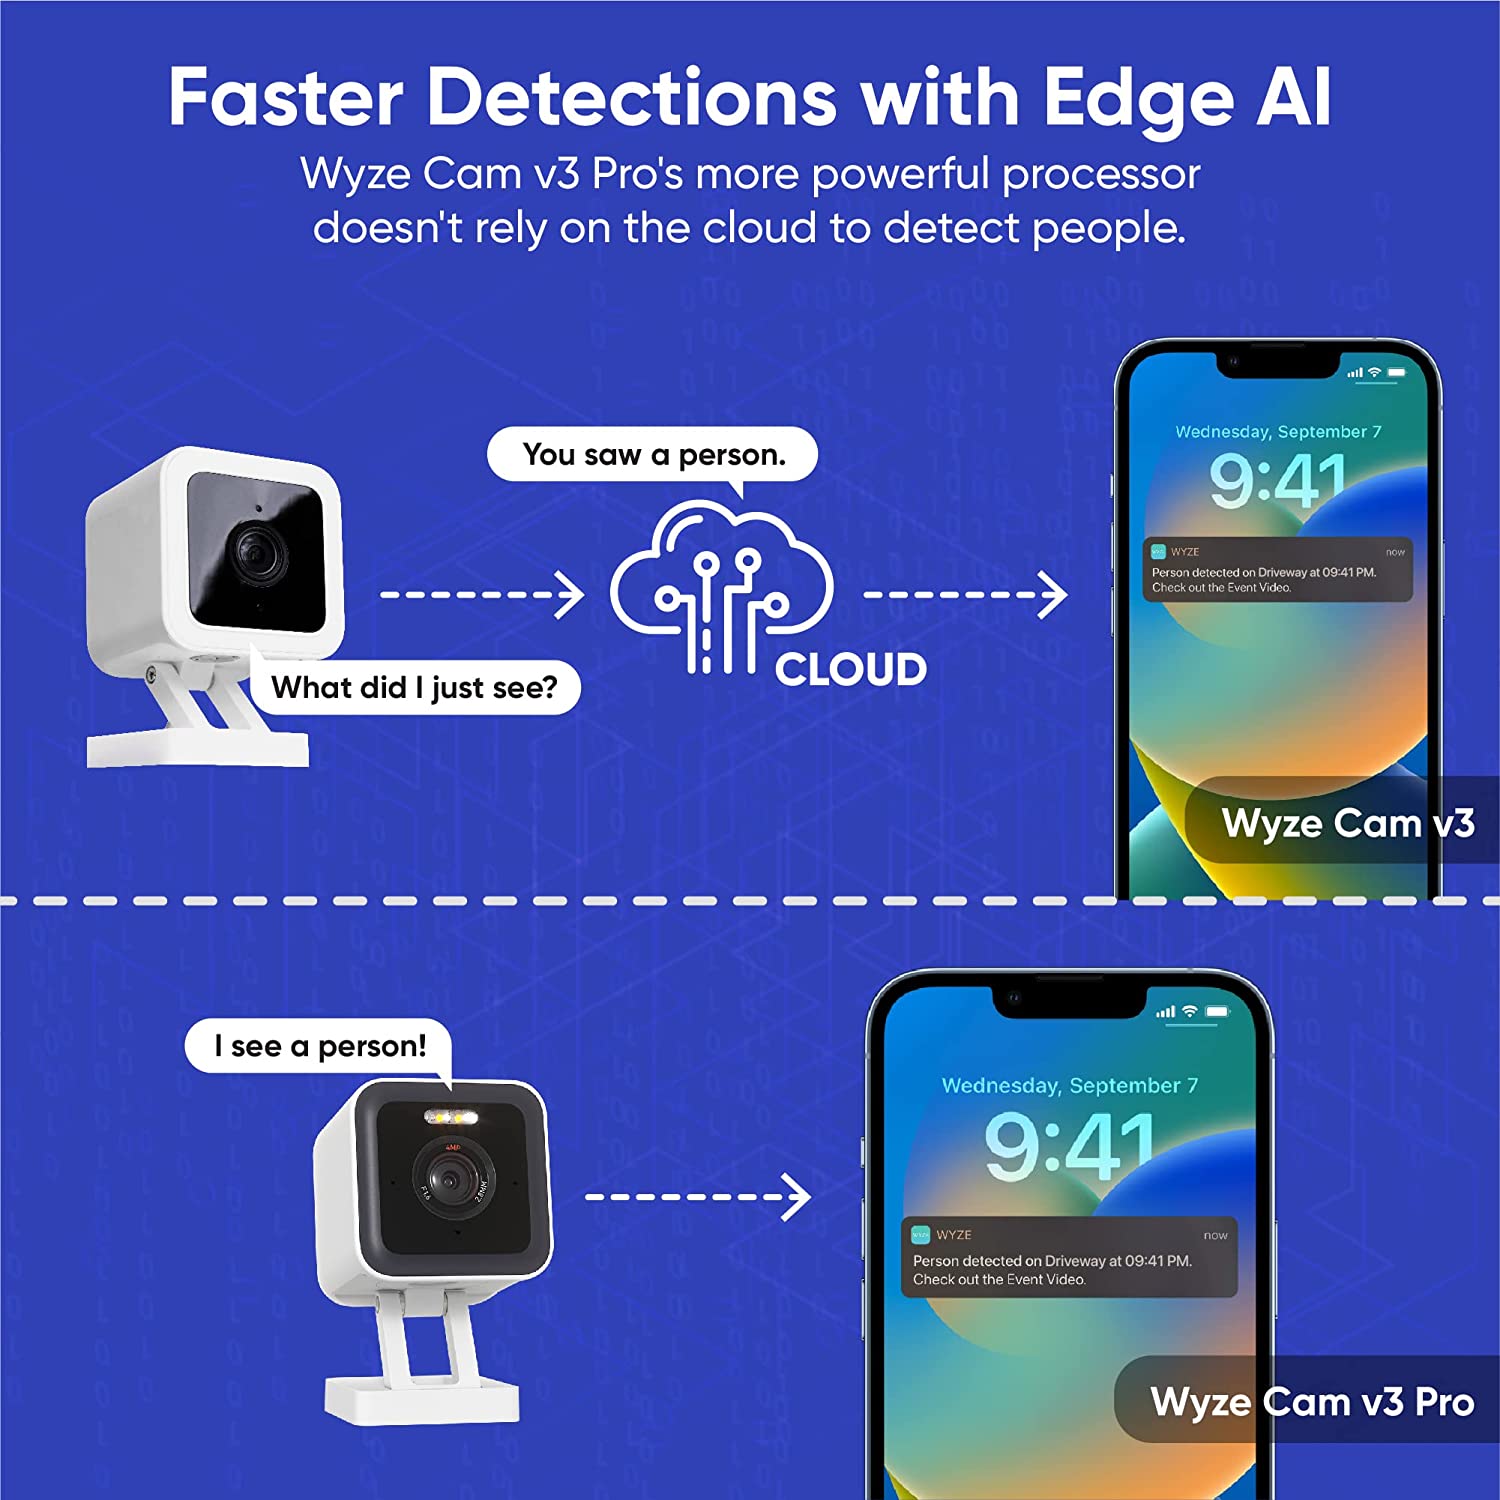 WYZE Cam v3 with Color Night Vision, Wired 1080p HD Indoor/Outdoor Video Camera, 2-Way Audio, Works with Alexa, Google Assistant, and IFTTT